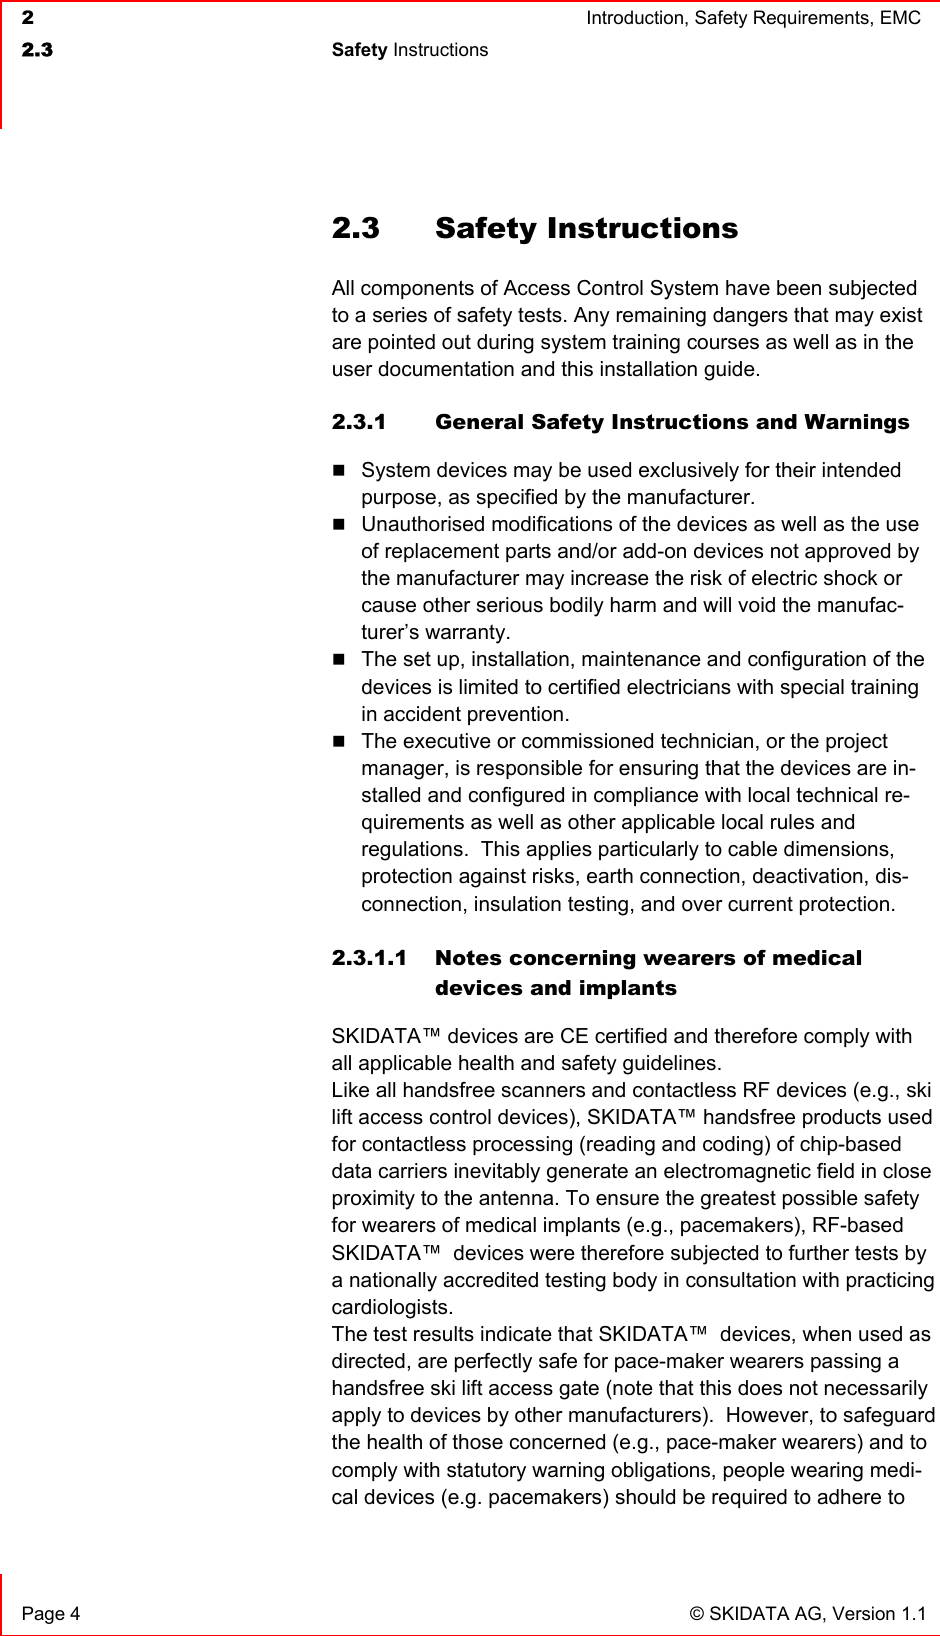  2  Introduction, Safety Requirements, EMC  2.3 Safety Instructions    Page 4  © SKIDATA AG, Version 1.1 2.3 Safety Instructions All components of Access Control System have been subjected to a series of safety tests. Any remaining dangers that may exist are pointed out during system training courses as well as in the user documentation and this installation guide. 2.3.1  General Safety Instructions and Warnings  System devices may be used exclusively for their intended purpose, as specified by the manufacturer.  Unauthorised modifications of the devices as well as the use of replacement parts and/or add-on devices not approved by the manufacturer may increase the risk of electric shock or cause other serious bodily harm and will void the manufac-turer’s warranty.  The set up, installation, maintenance and configuration of the devices is limited to certified electricians with special training in accident prevention.  The executive or commissioned technician, or the project manager, is responsible for ensuring that the devices are in-stalled and configured in compliance with local technical re-quirements as well as other applicable local rules and regulations.  This applies particularly to cable dimensions, protection against risks, earth connection, deactivation, dis-connection, insulation testing, and over current protection.  2.3.1.1 Notes concerning wearers of medical devices and implants SKIDATA™ devices are CE certified and therefore comply with all applicable health and safety guidelines.   Like all handsfree scanners and contactless RF devices (e.g., ski lift access control devices), SKIDATA™ handsfree products used for contactless processing (reading and coding) of chip-based data carriers inevitably generate an electromagnetic field in close proximity to the antenna. To ensure the greatest possible safety for wearers of medical implants (e.g., pacemakers), RF-based SKIDATA™  devices were therefore subjected to further tests by a nationally accredited testing body in consultation with practicing cardiologists. The test results indicate that SKIDATA™  devices, when used as directed, are perfectly safe for pace-maker wearers passing a handsfree ski lift access gate (note that this does not necessarily apply to devices by other manufacturers).  However, to safeguard the health of those concerned (e.g., pace-maker wearers) and to comply with statutory warning obligations, people wearing medi-cal devices (e.g. pacemakers) should be required to adhere to 